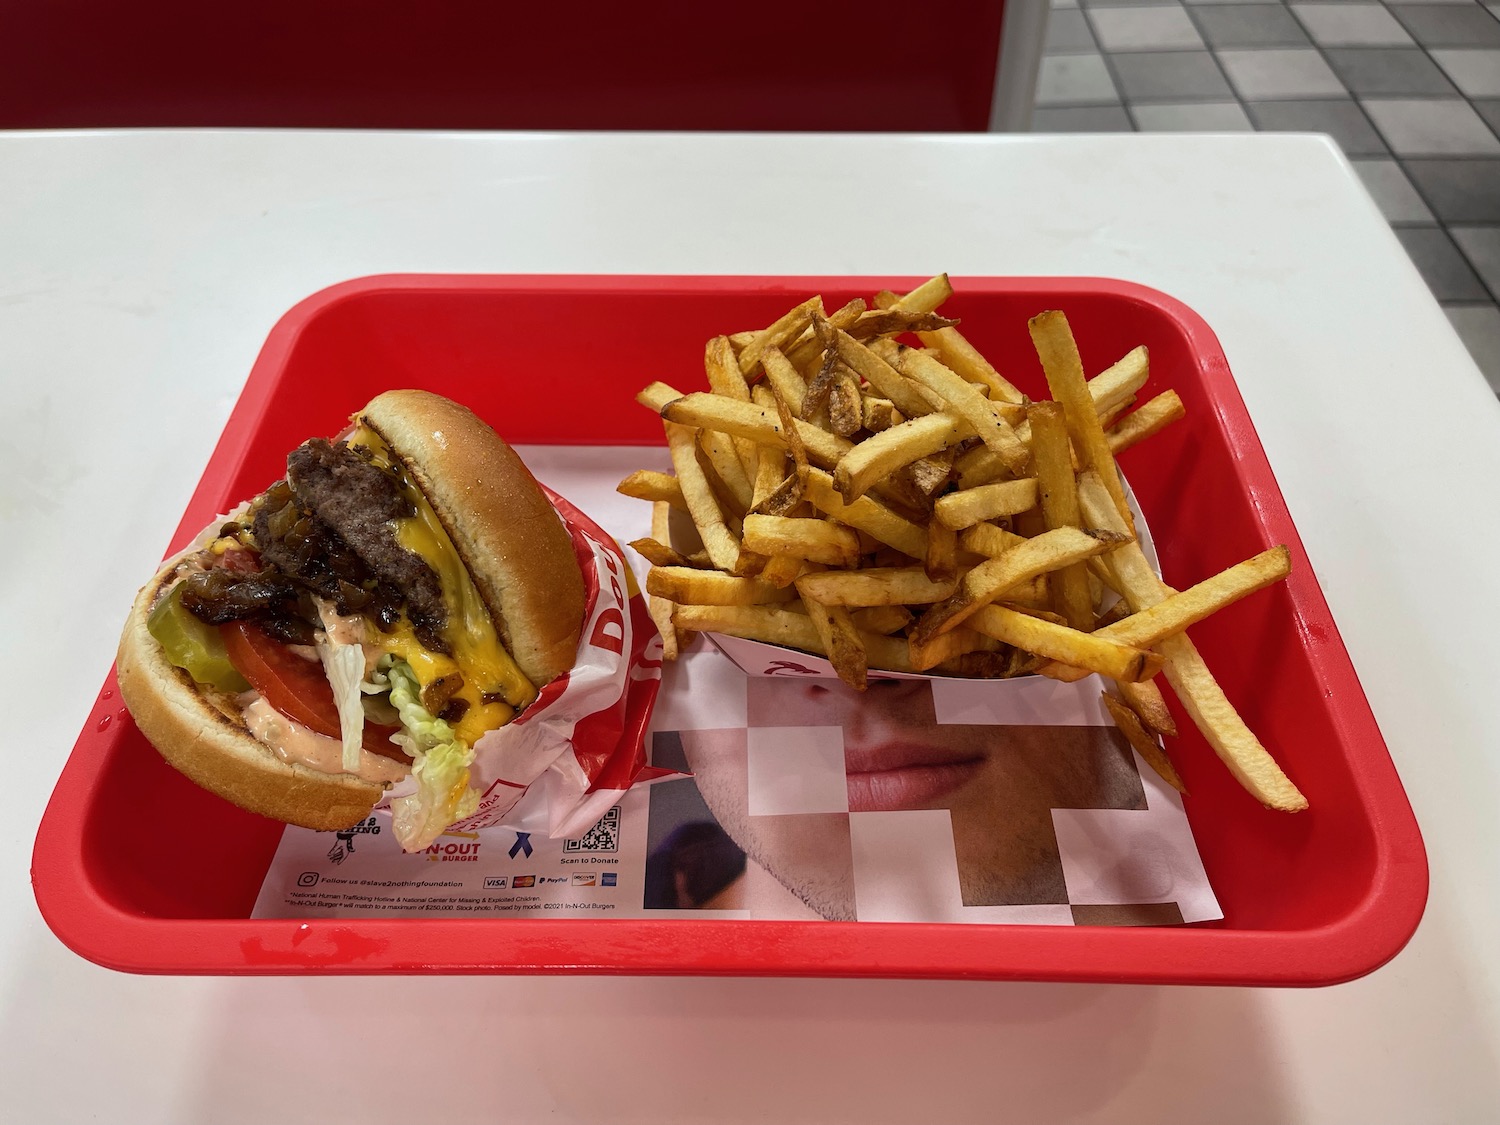 a burger and fries in a red tray